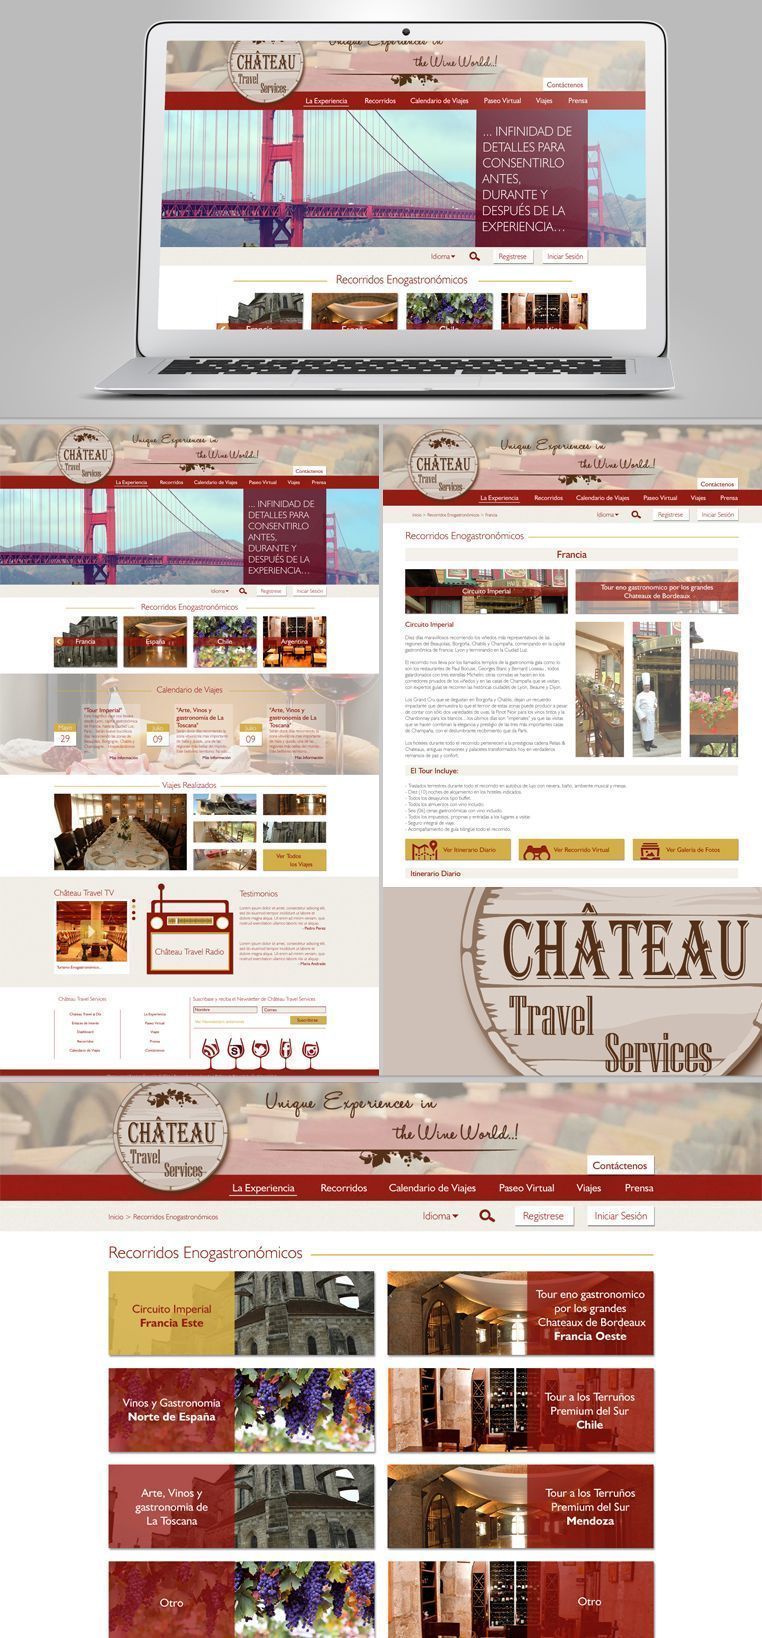 Chateau Travel Services